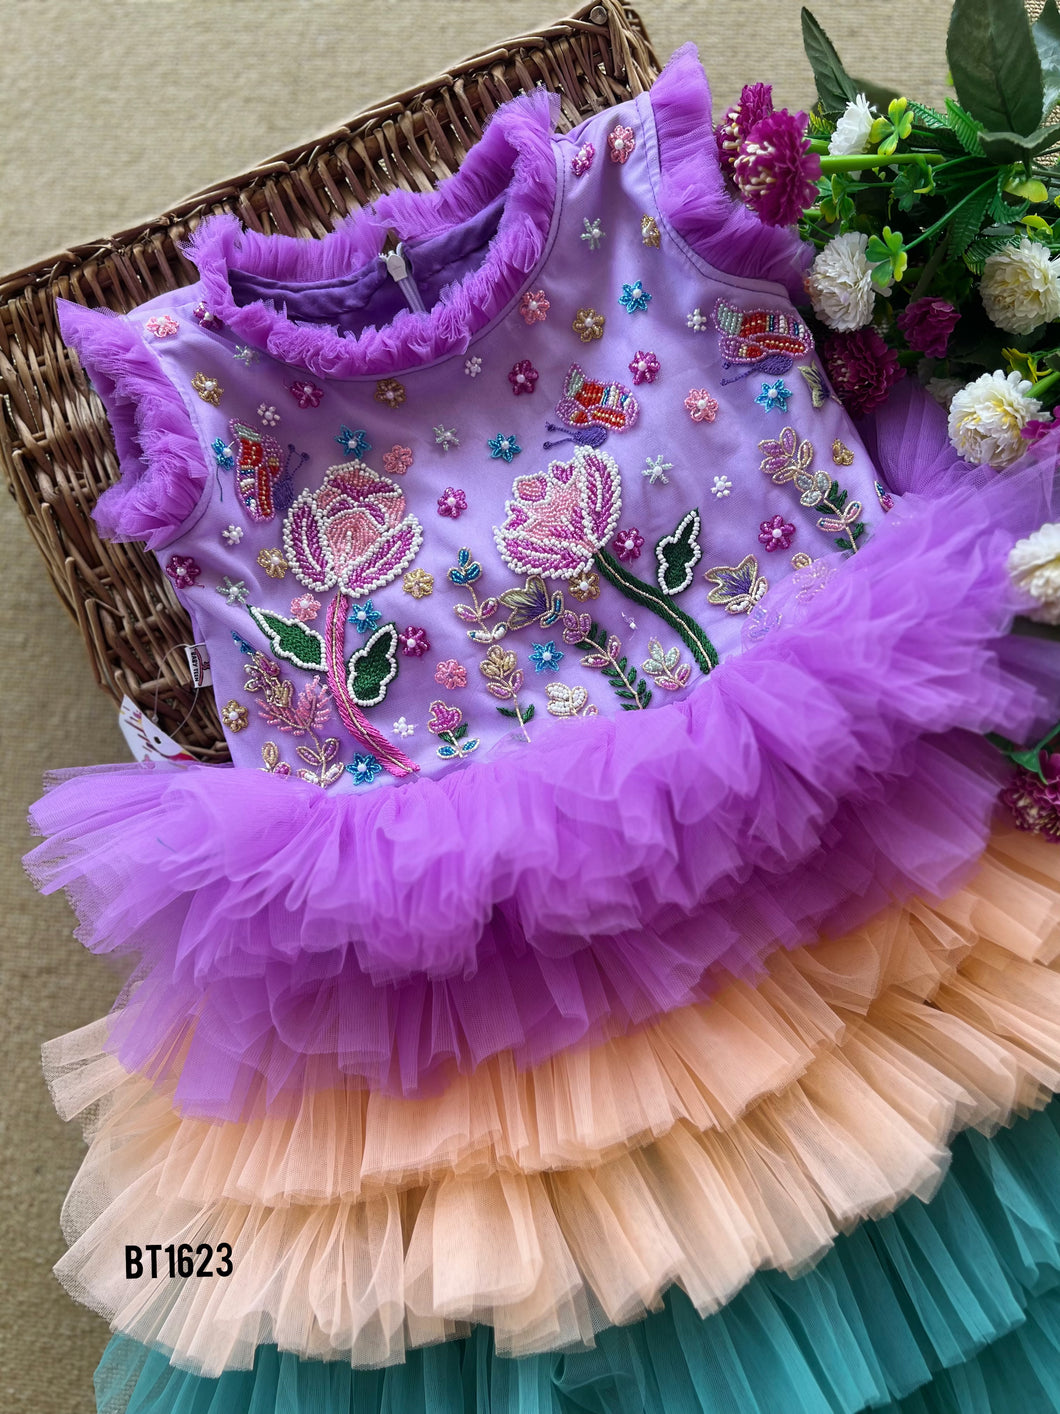 BT1623 Hand Embroidered Flower Theme Birthday Party Frock For Baby Girls